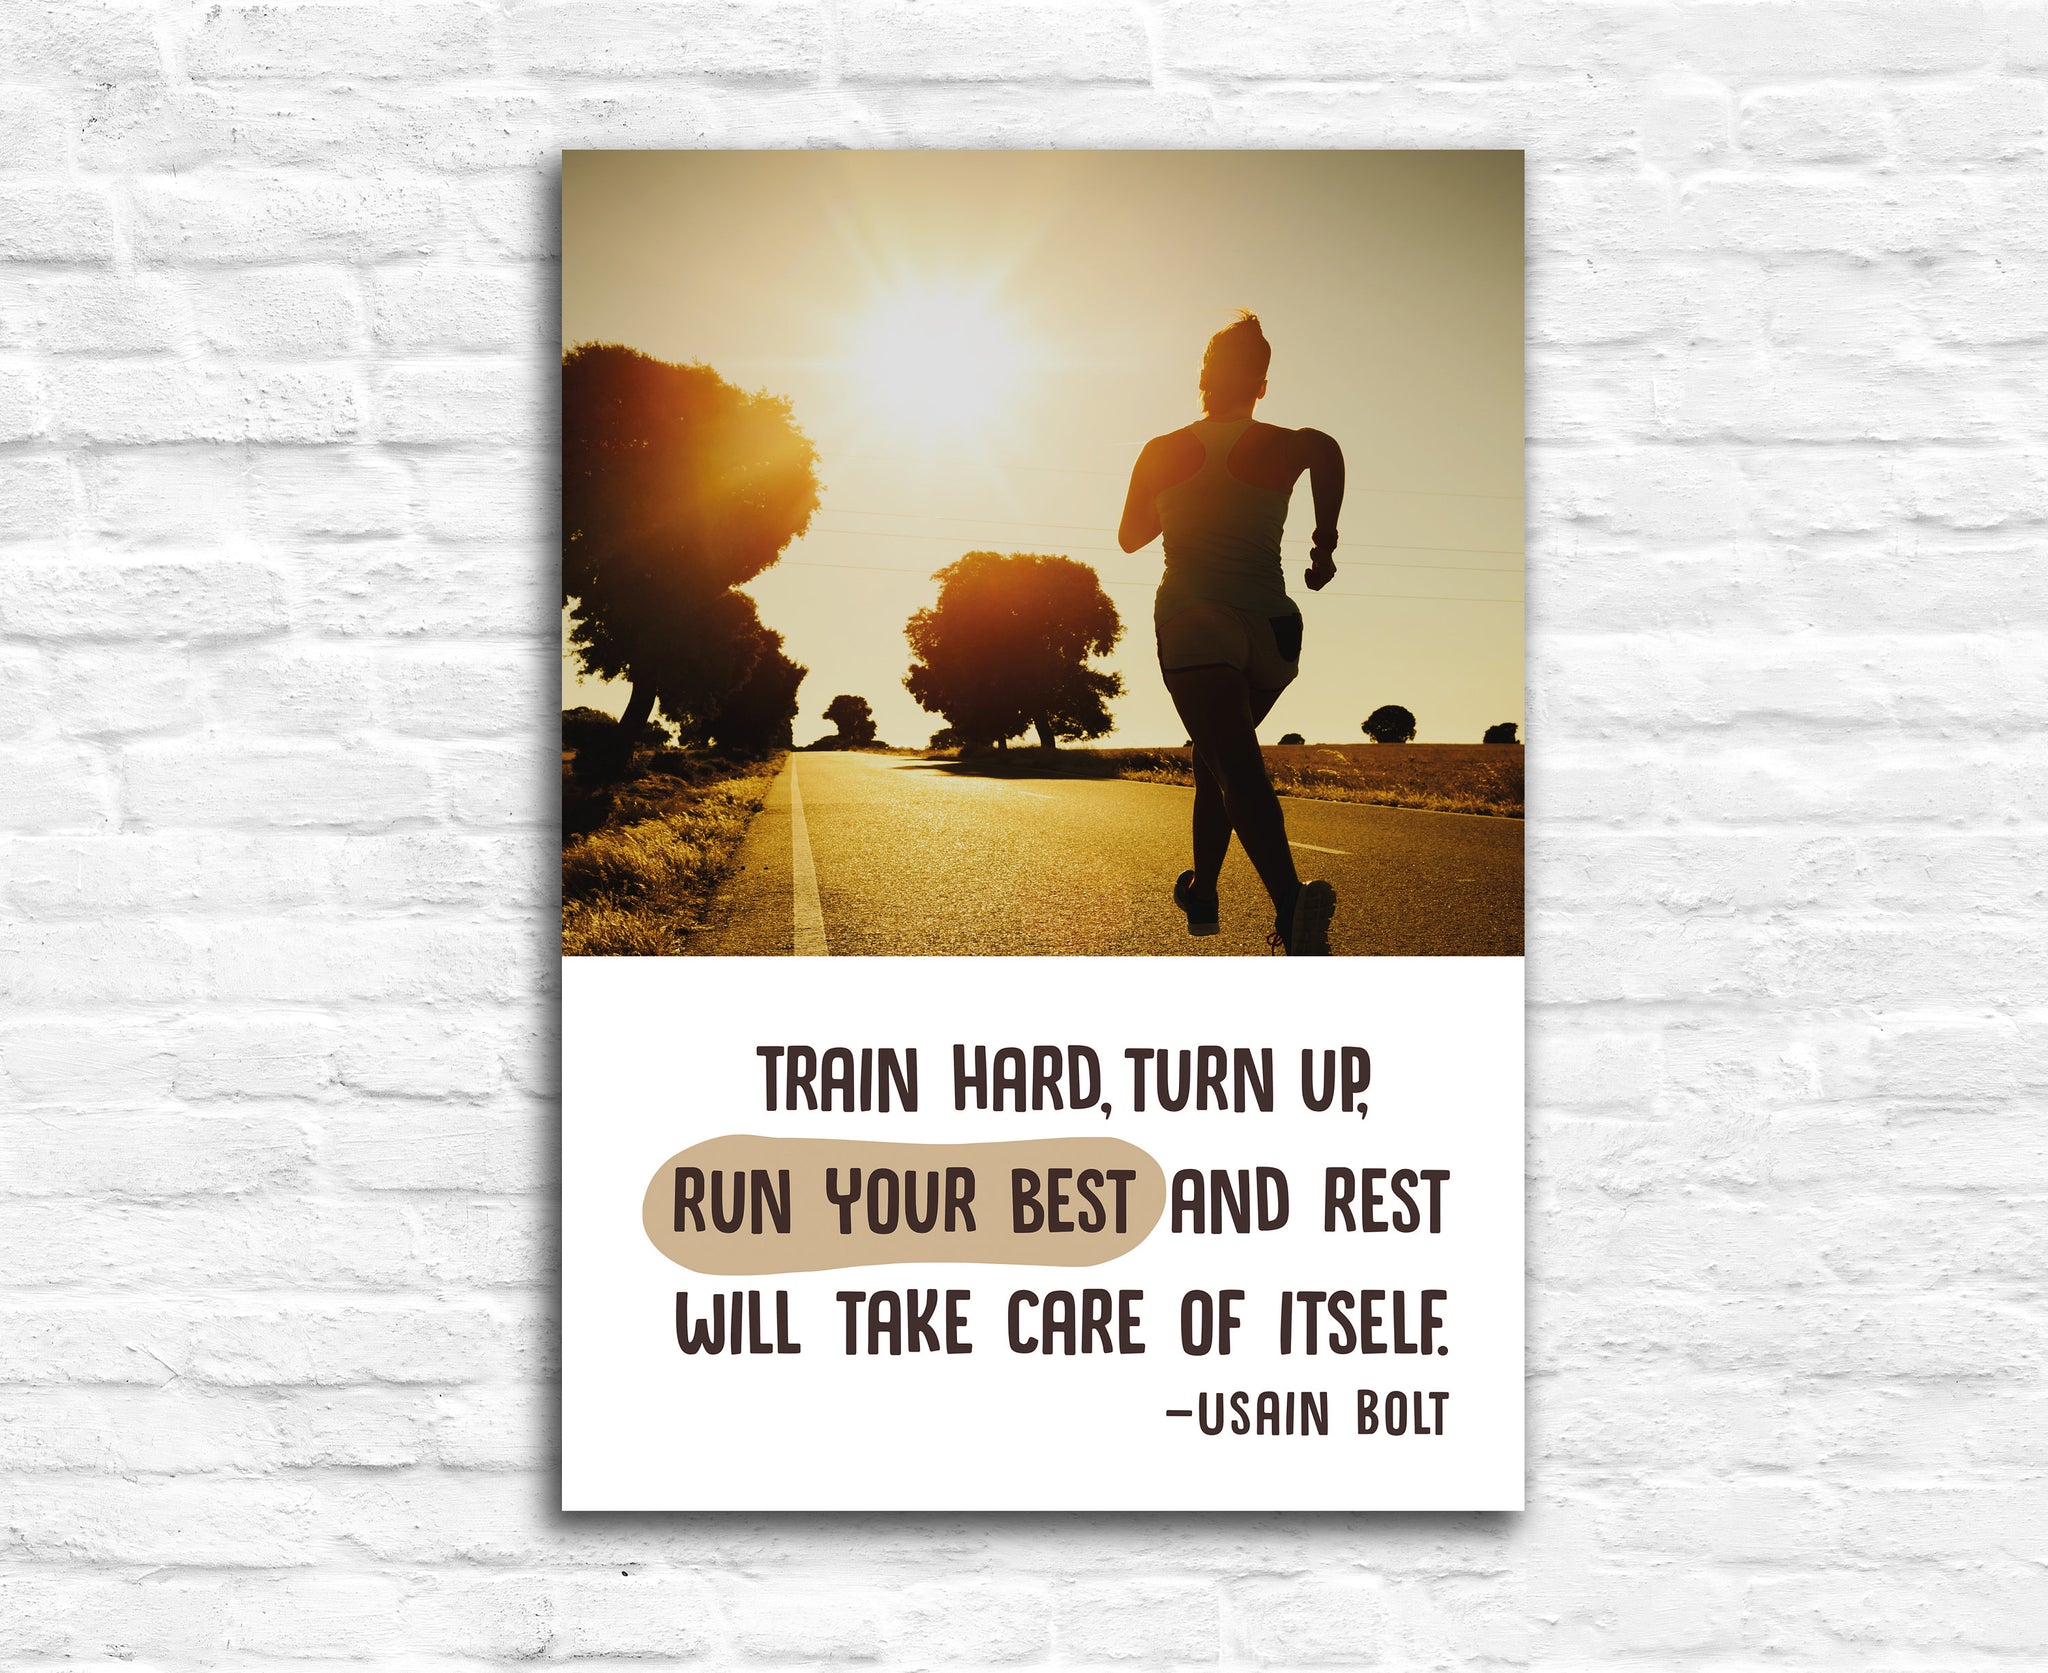 Fitness center wall decoration, Workout quotes, Gym quotes, Inspired poster, Motivational posters for inspiration, Exclusive workout posters